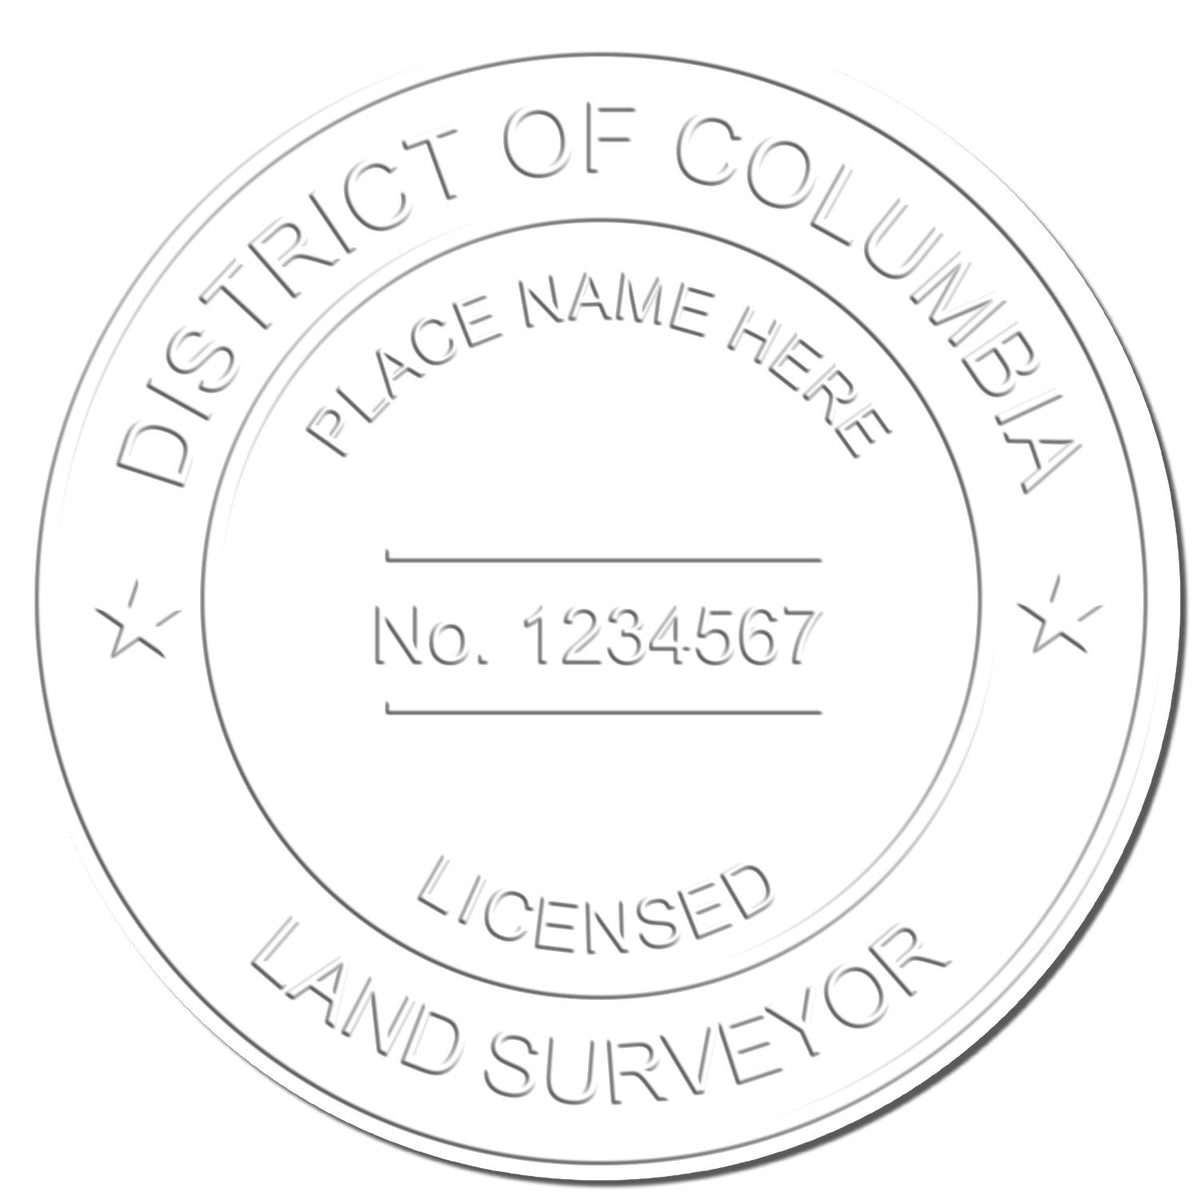 This paper is stamped with a sample imprint of the Hybrid District of Columbia Land Surveyor Seal, signifying its quality and reliability.